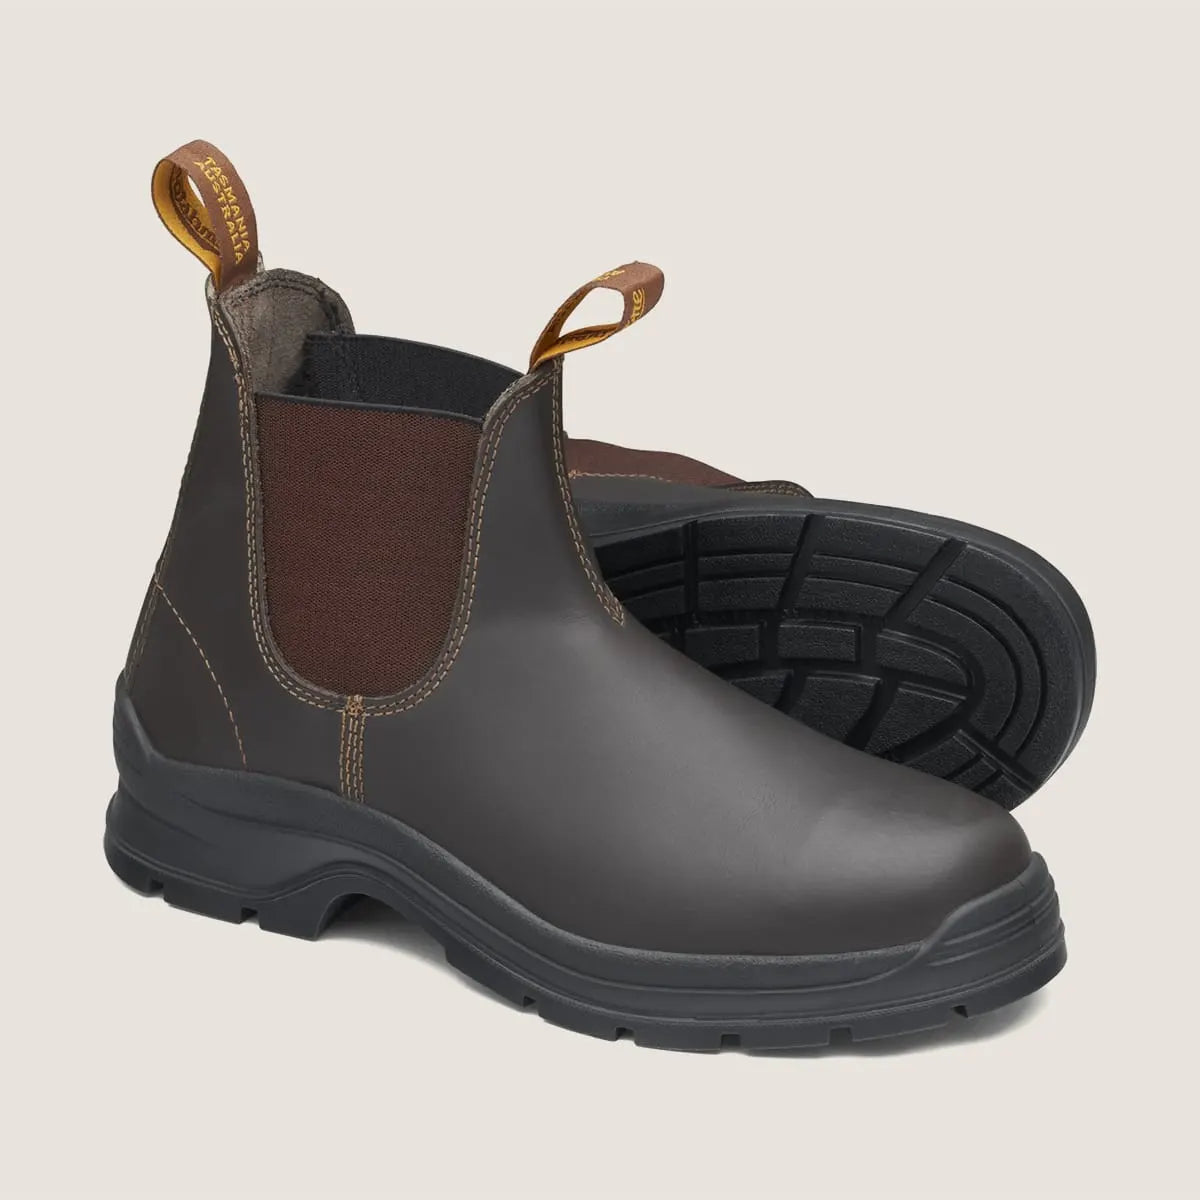 Blundstone 405 Elastic Sided Non Safety Boot-Brown